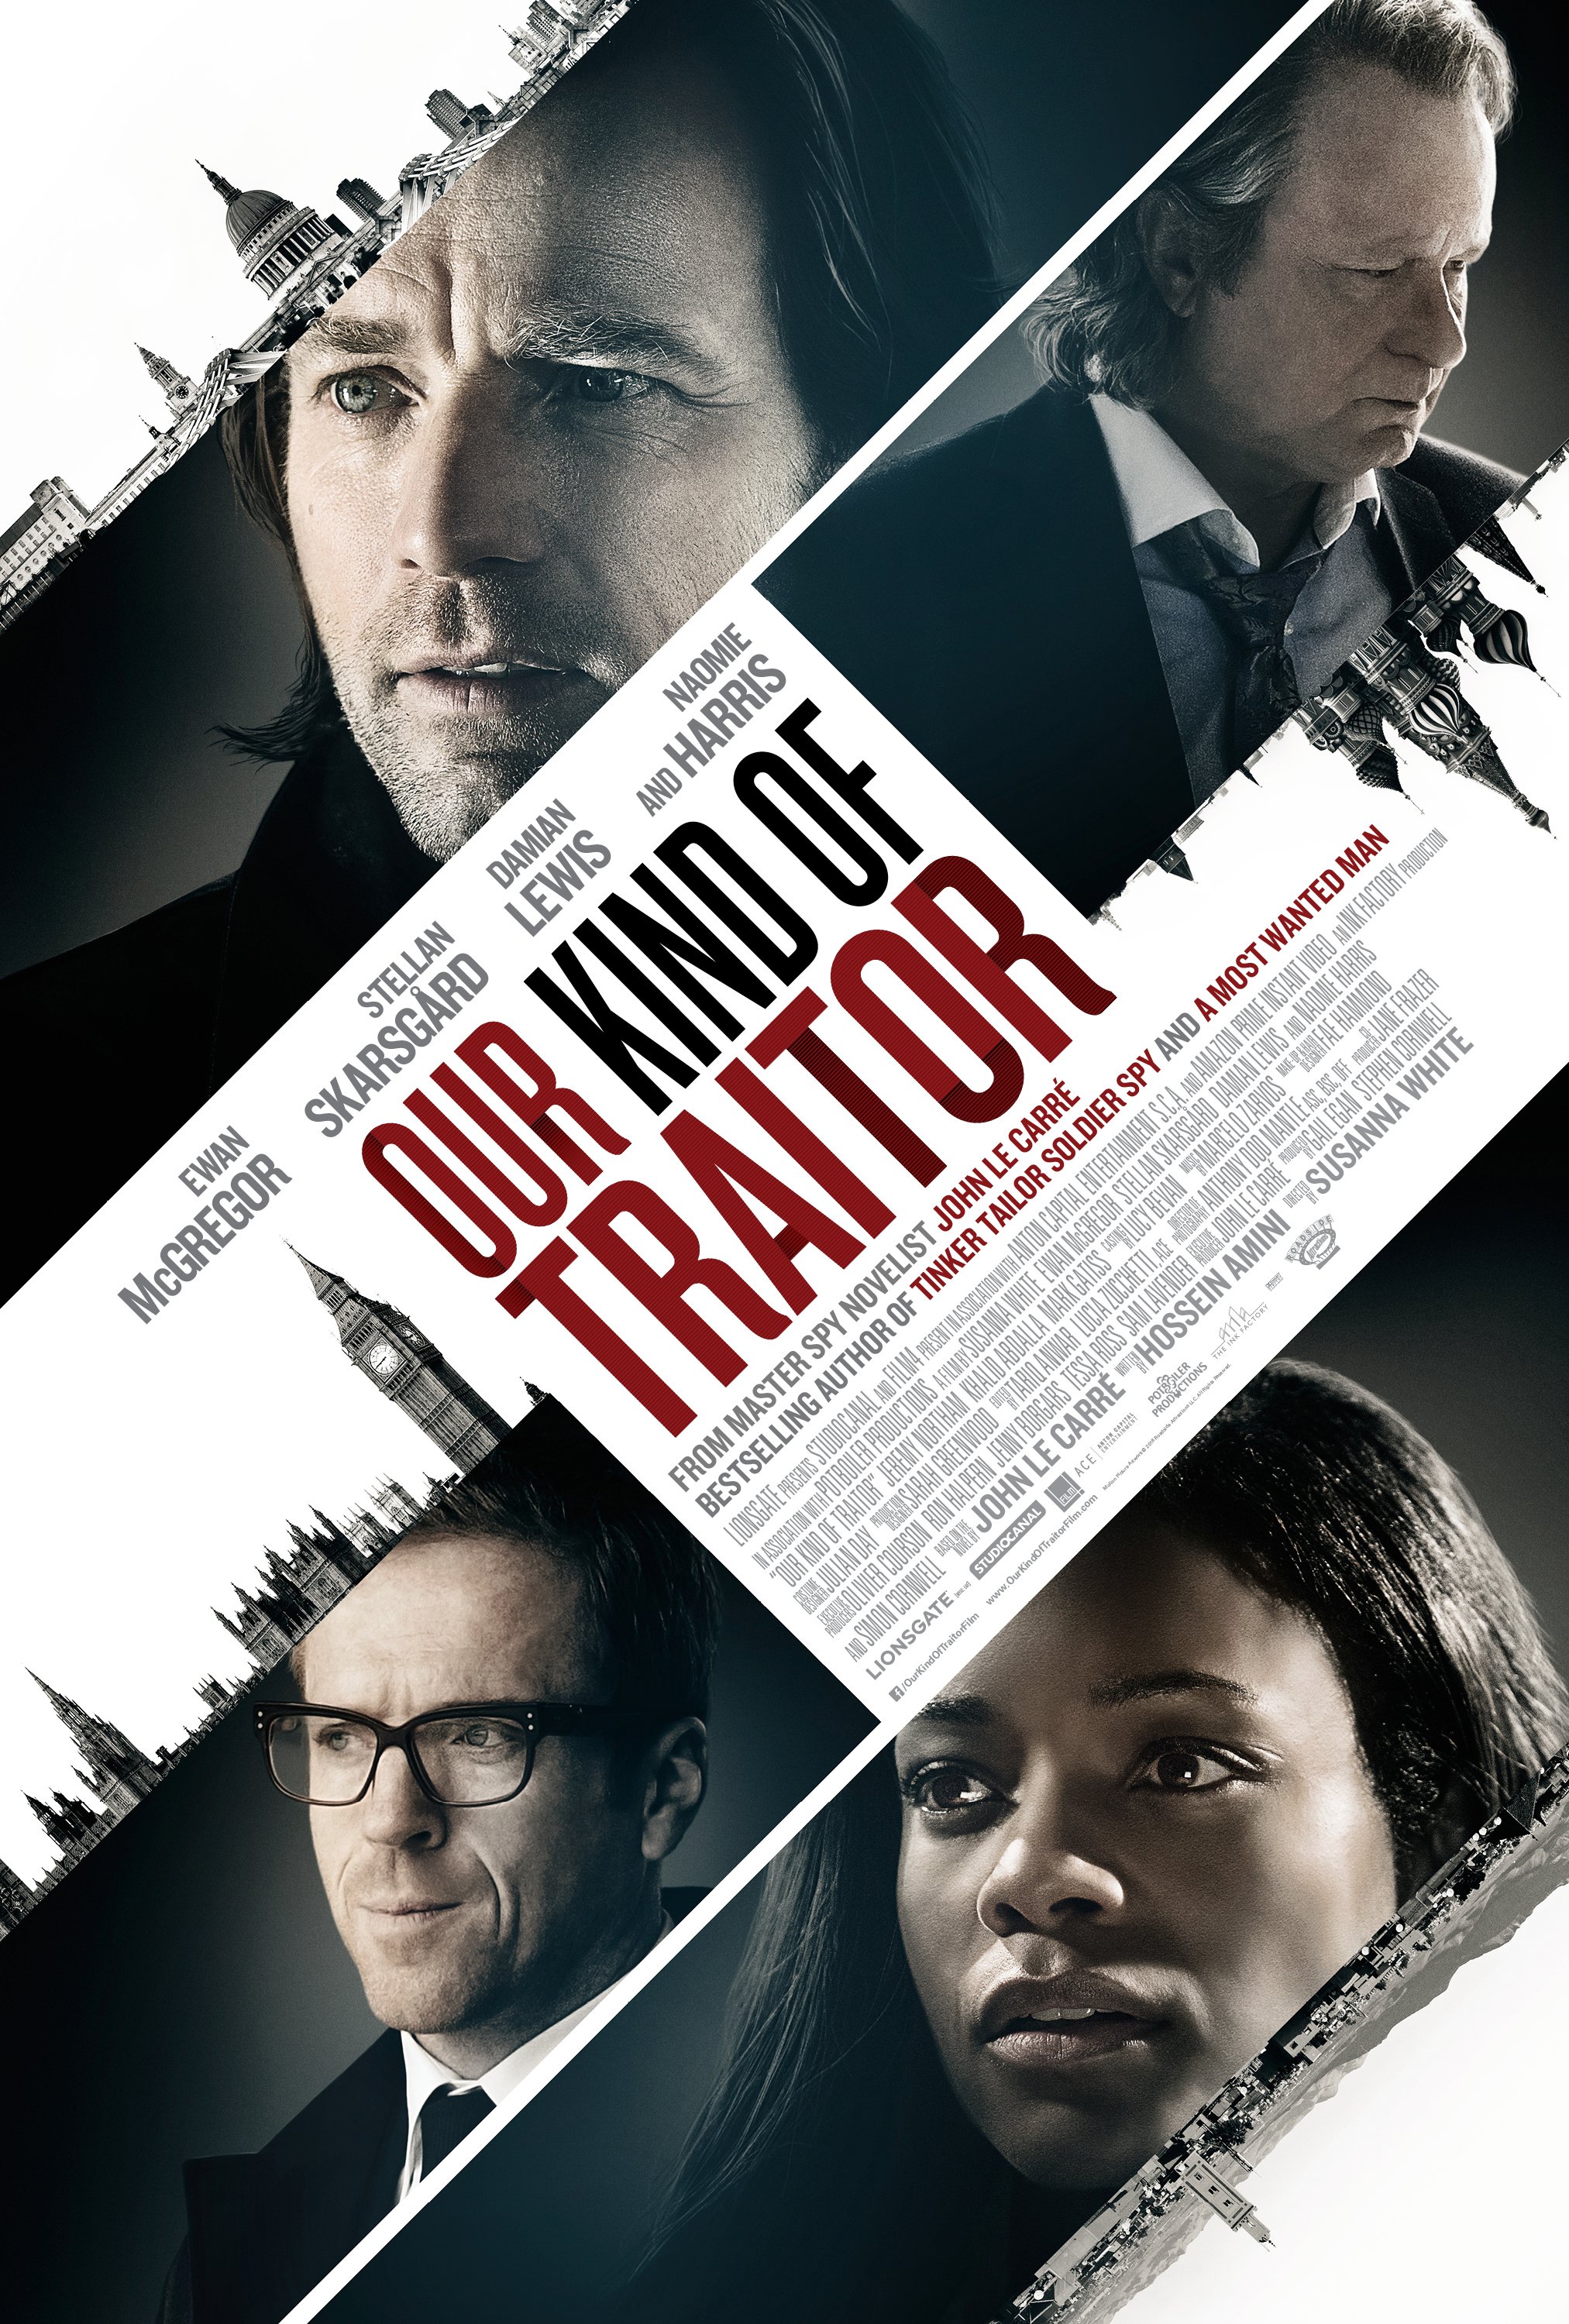 Our-Kind-Of-Traitor-Poster-004.jpg